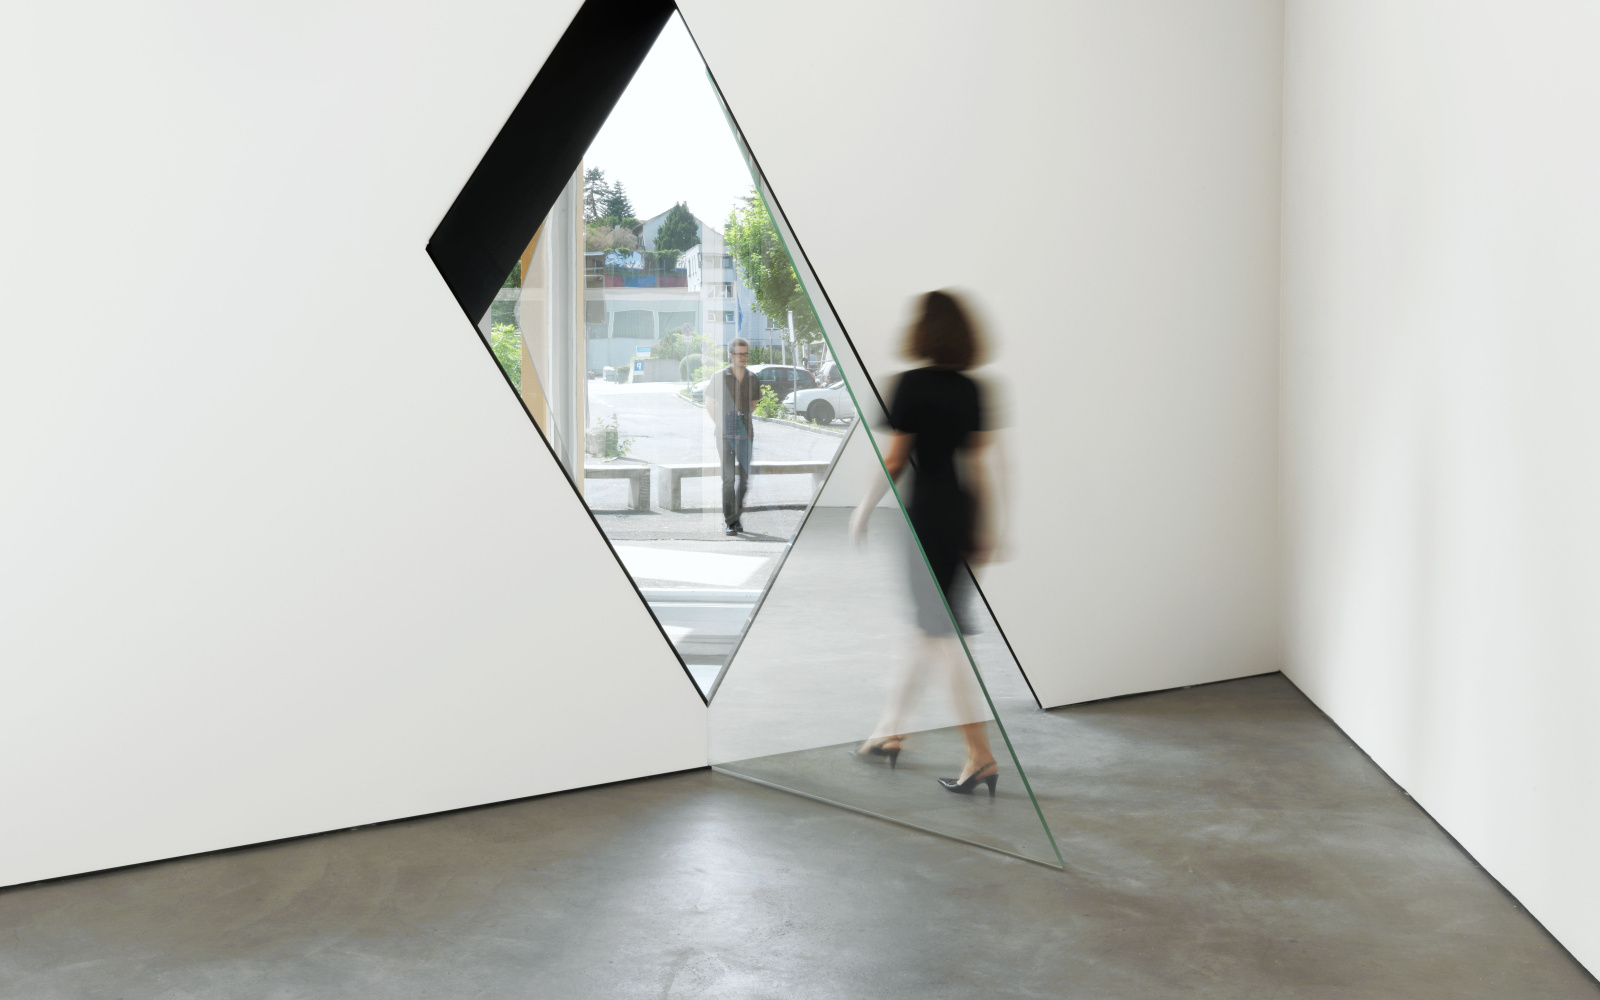 Architecture that uses glass and aluminium to create a kind of optical illusion.